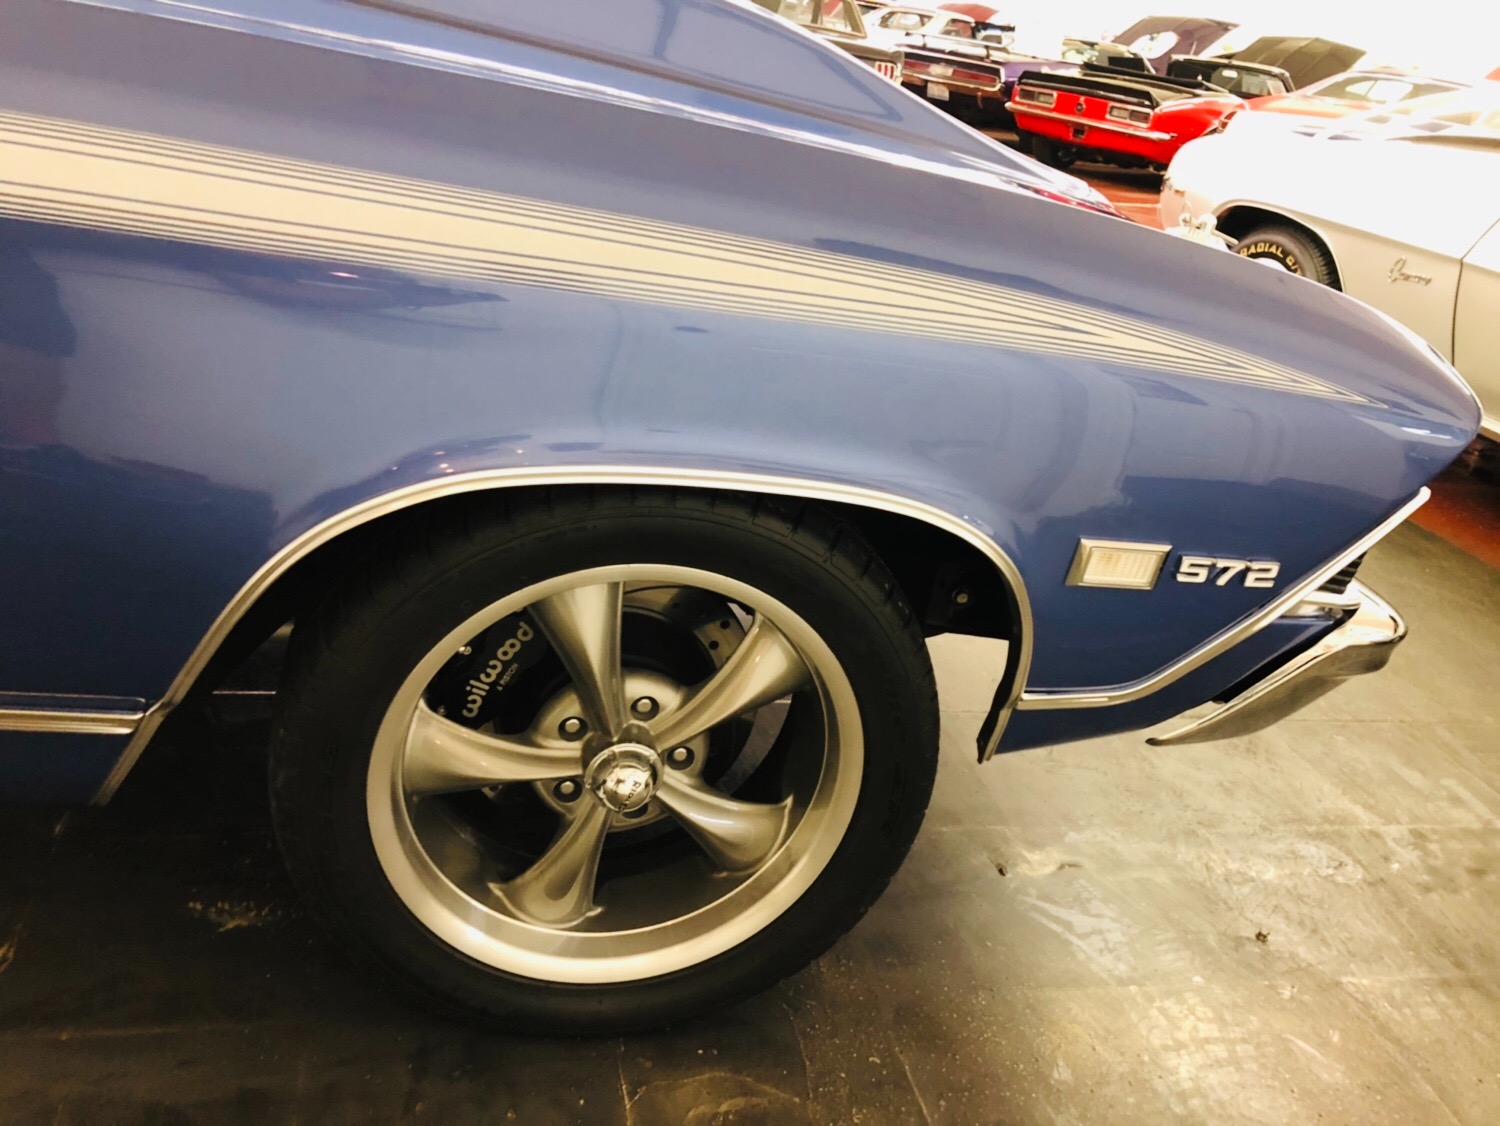 Used 1968 Chevrolet Chevelle -572 FUEL INJECTED STREET BEAST-PRO TOURING - SEE VIDEO - | Mundelein, IL